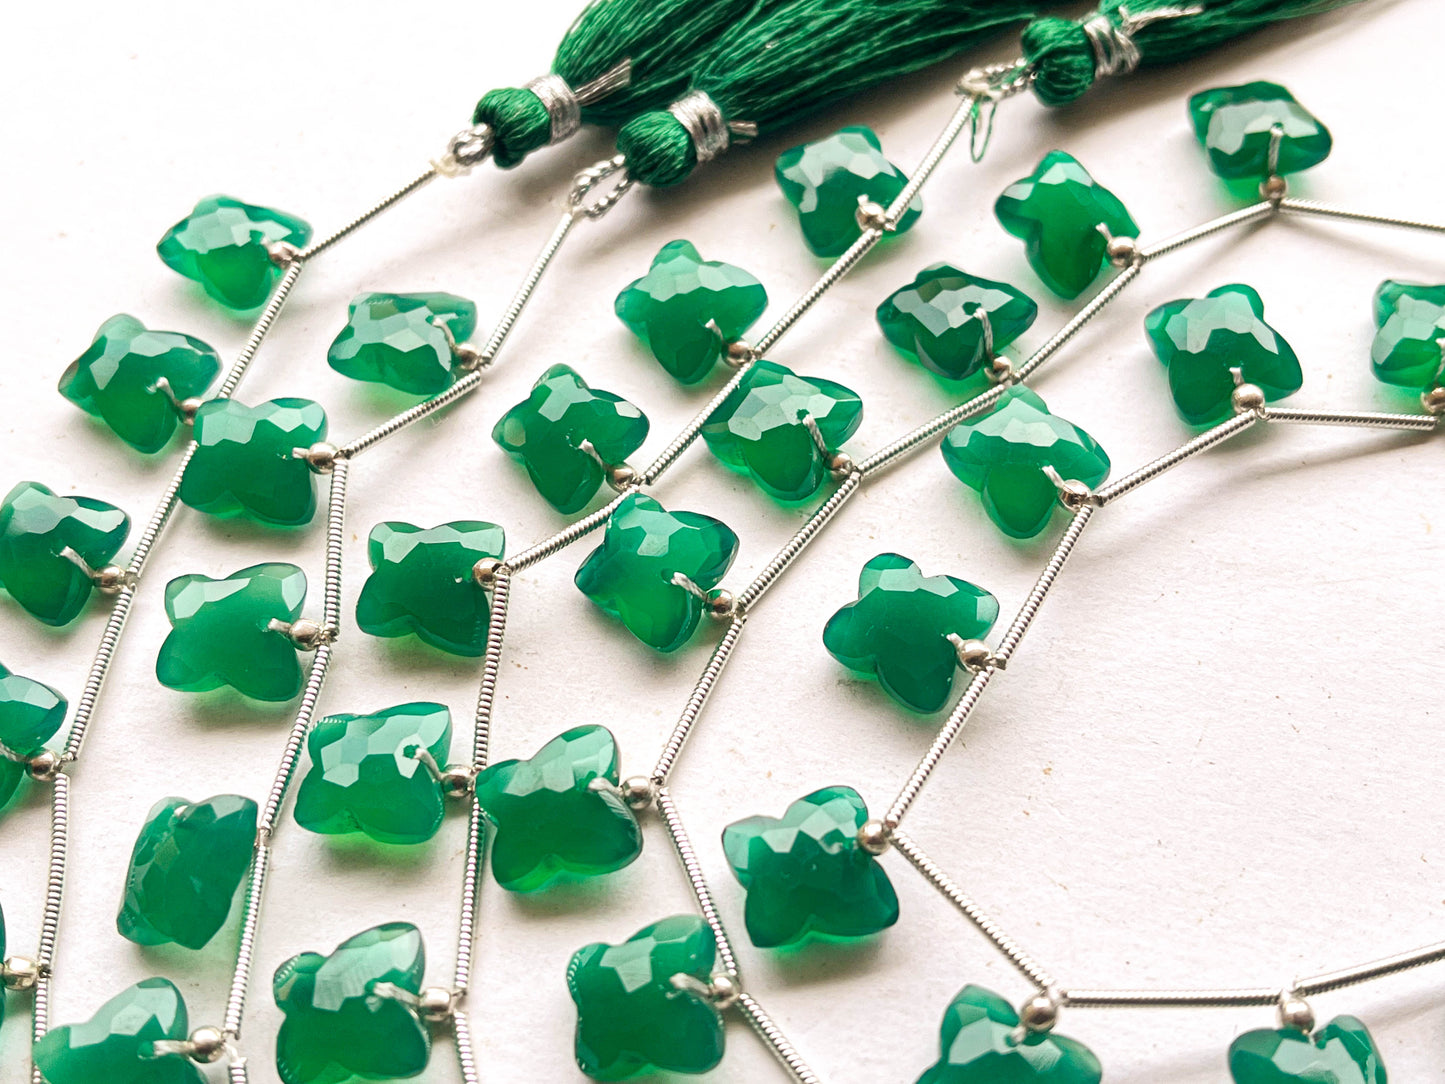 Green Onyx Butterfly Shape Faceted Beads, 13 Pieces Beadsforyourjewelry